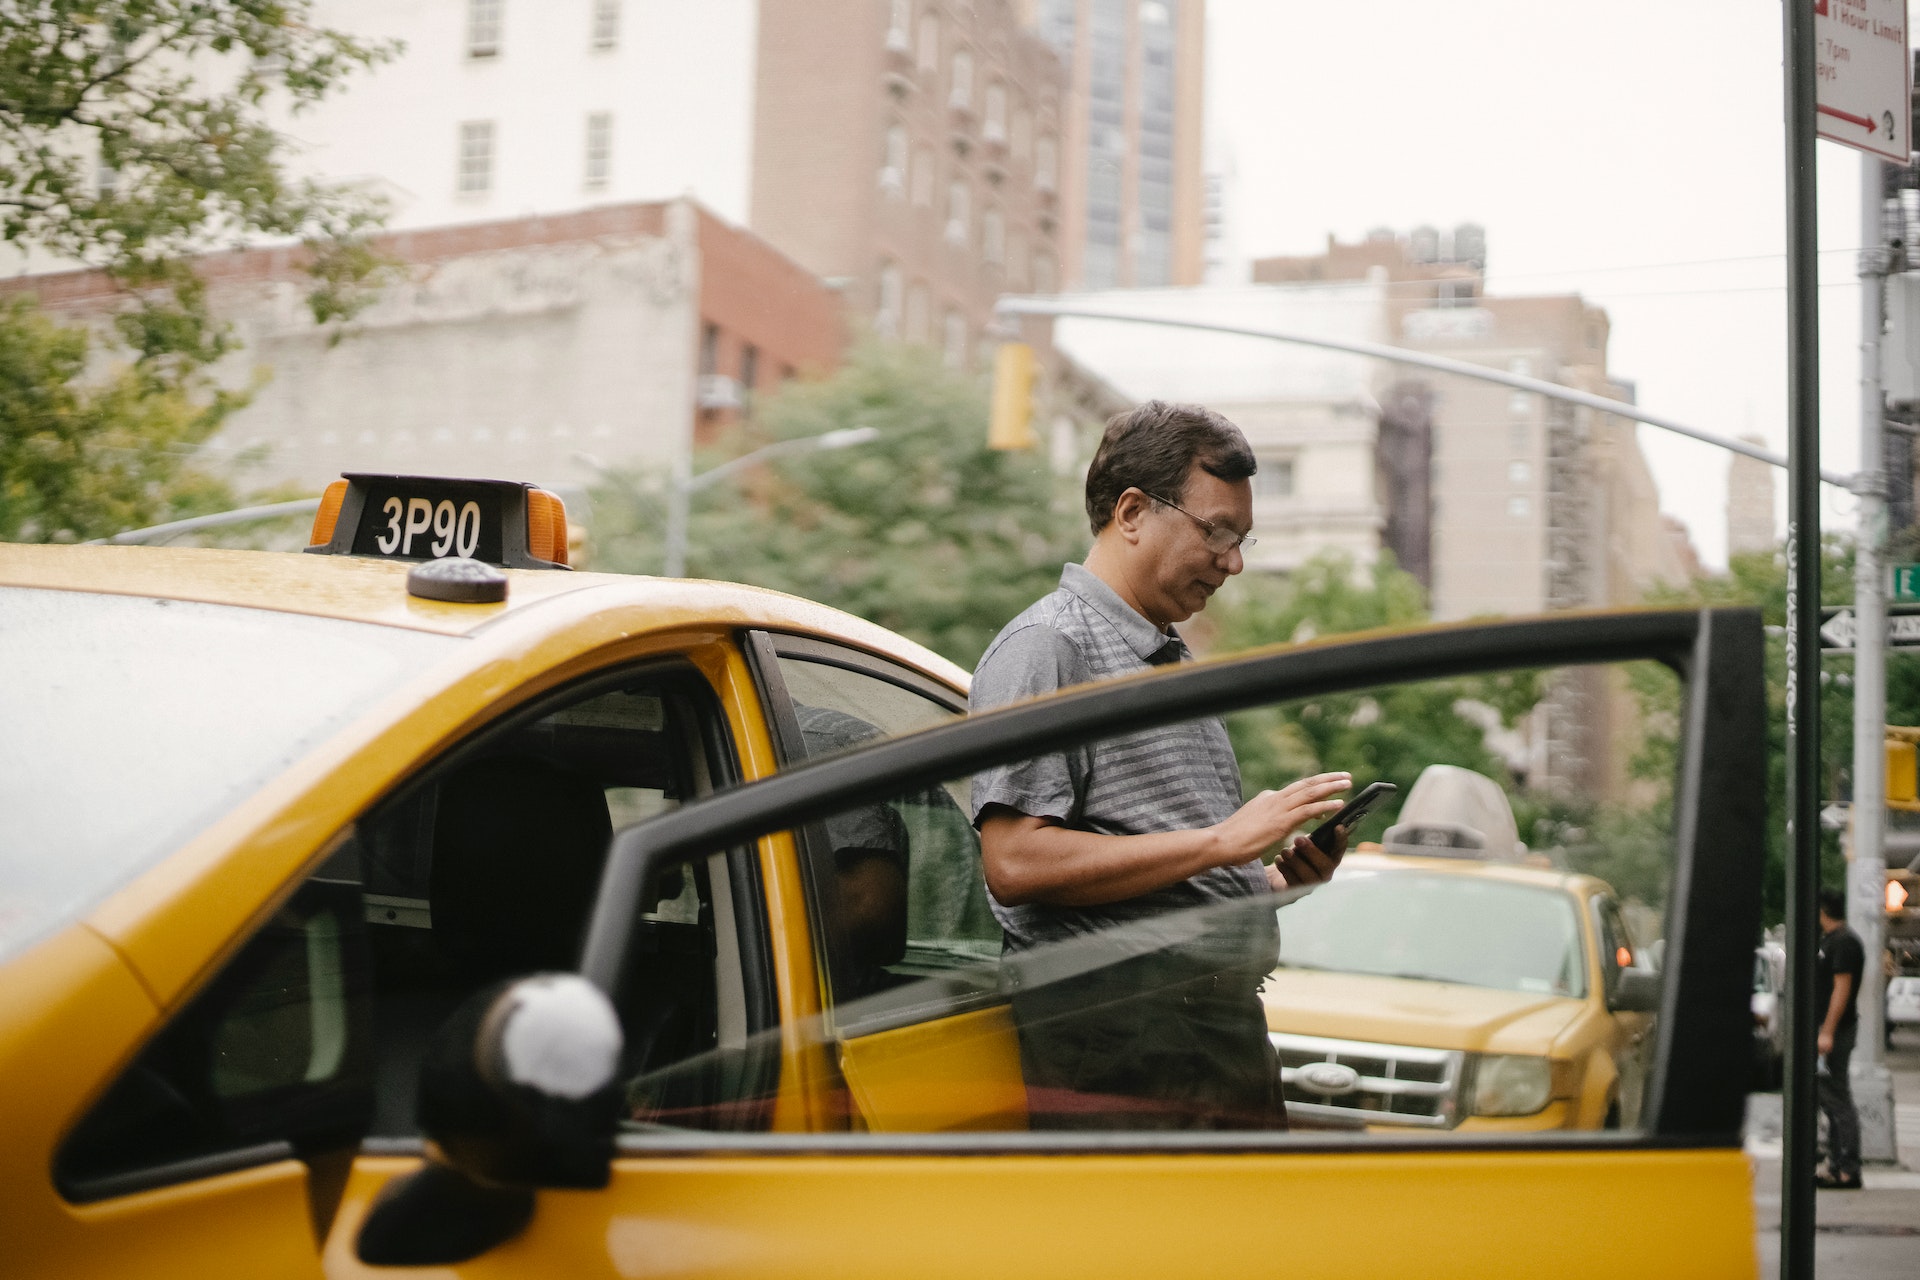 A man leaning against a taxi | Source: Pexels